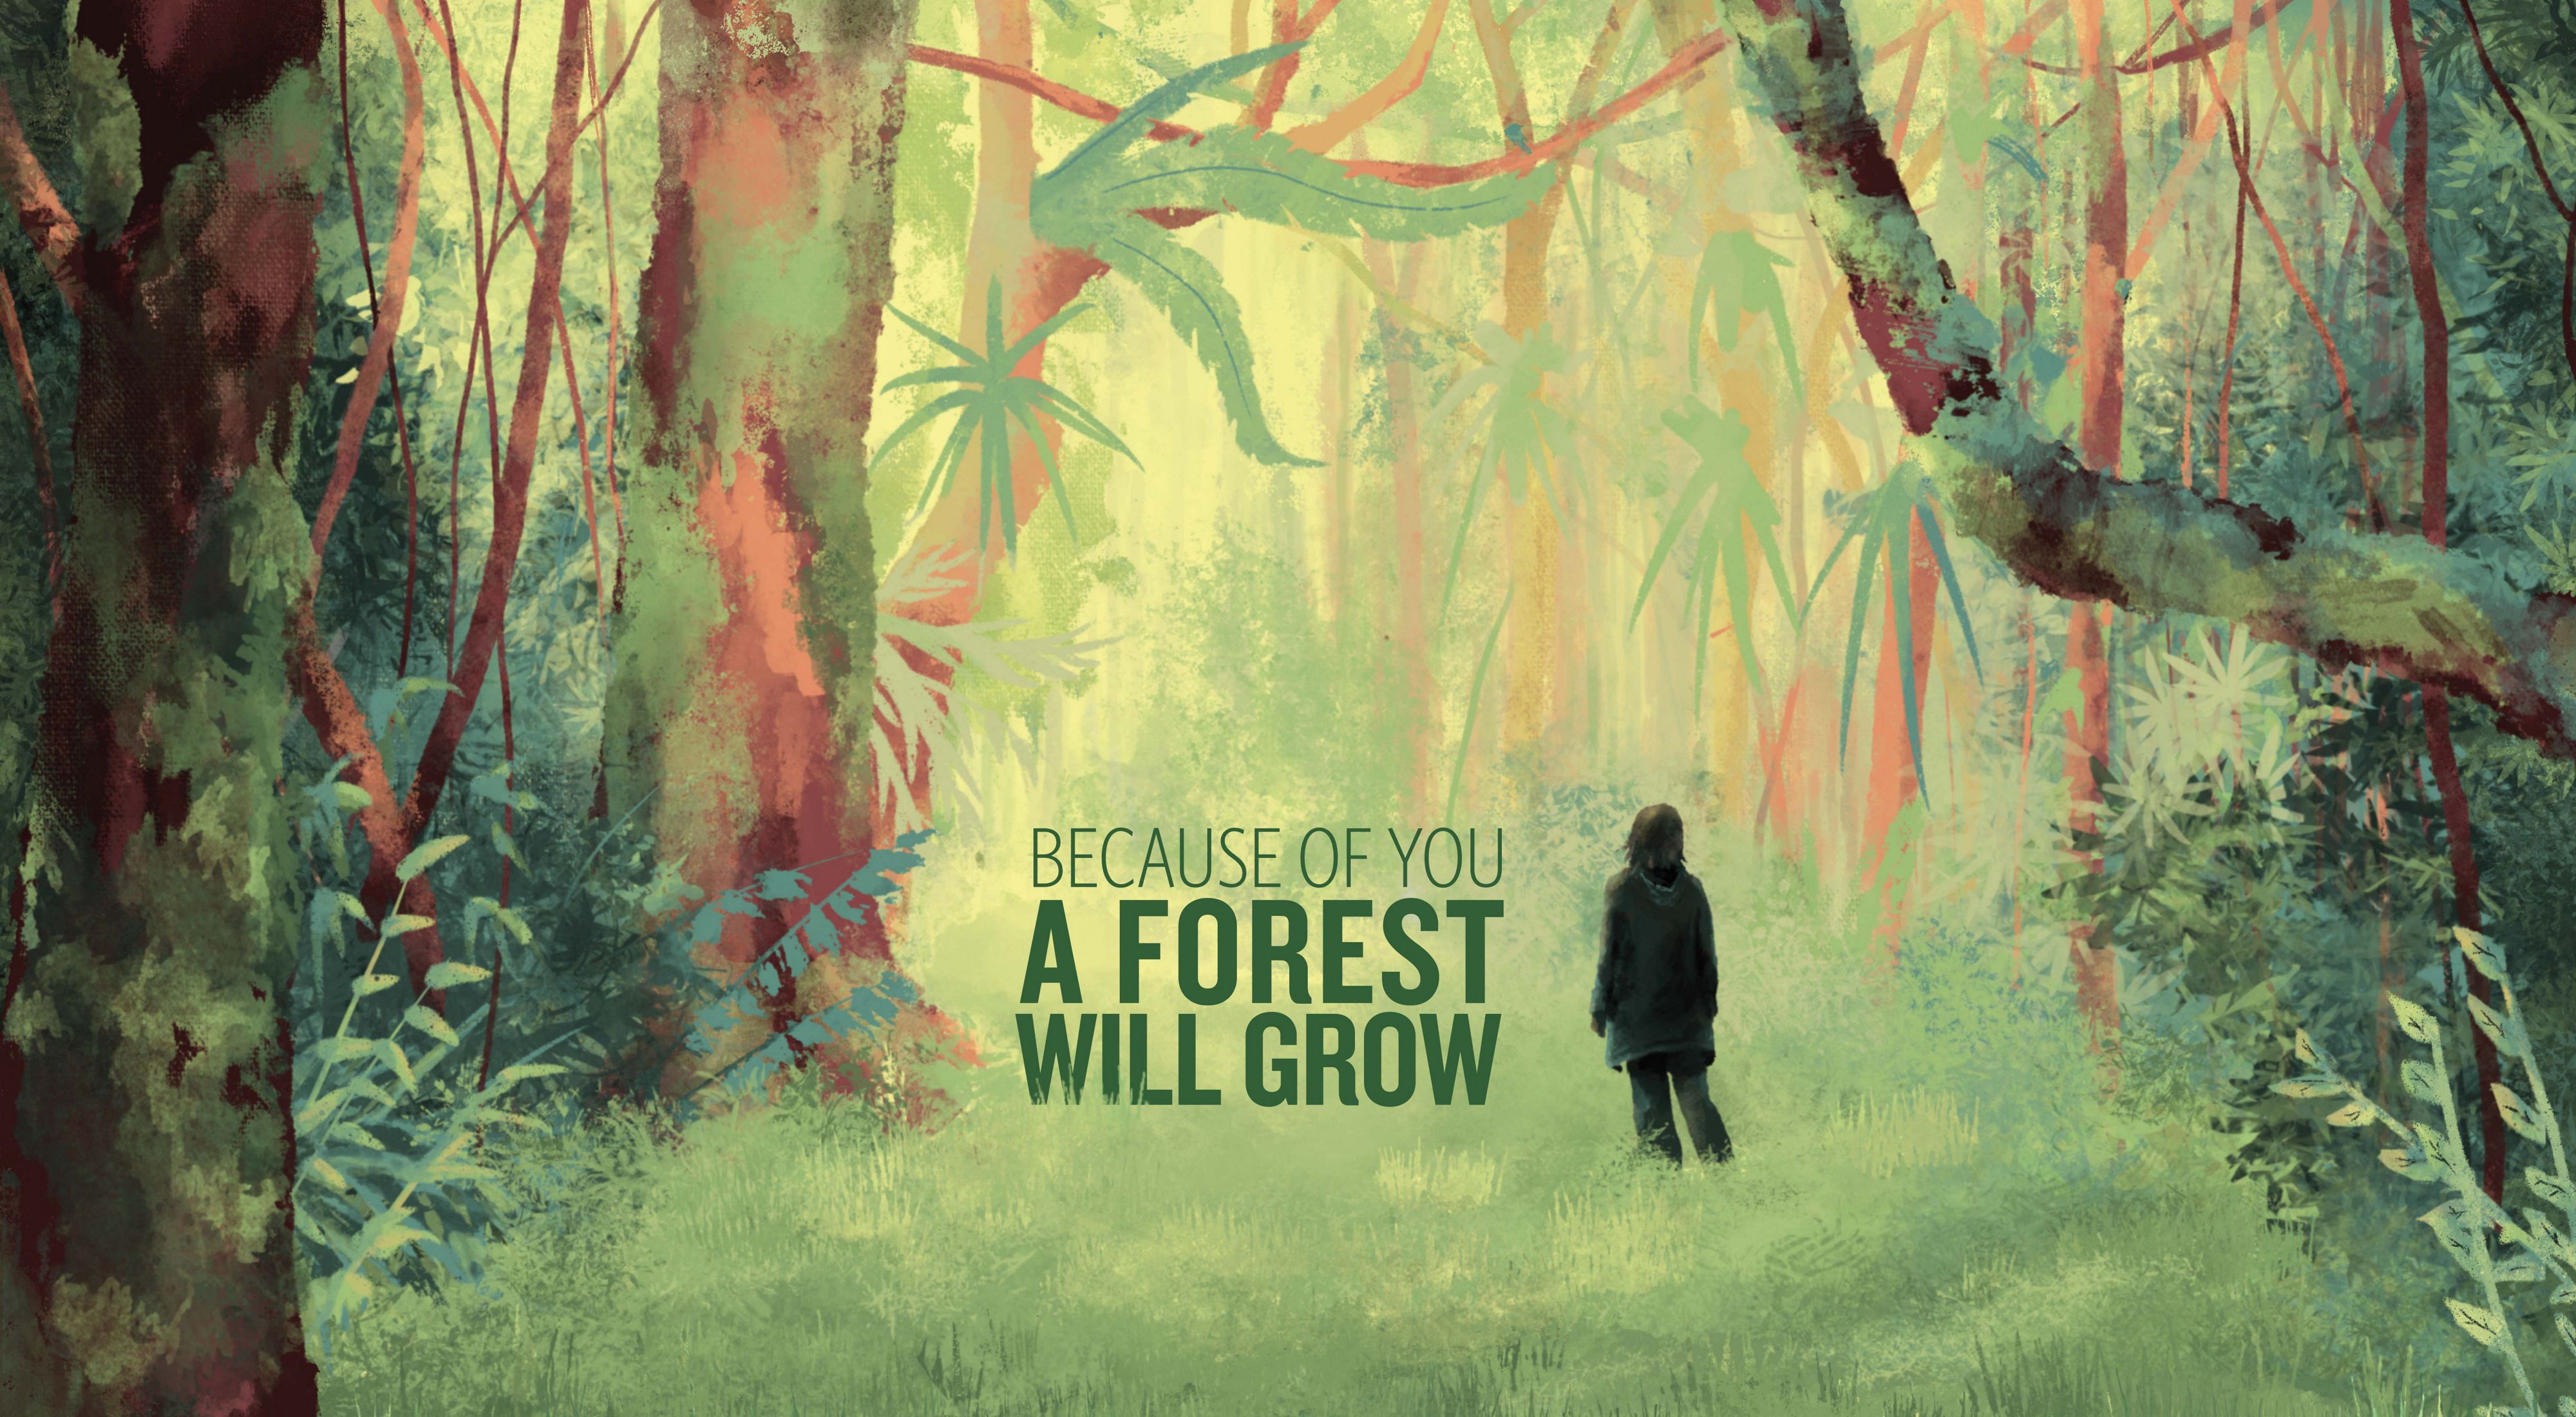 Animation of a silhouette looking into a green forest with the text "because of you a forest will grow" in the middle.